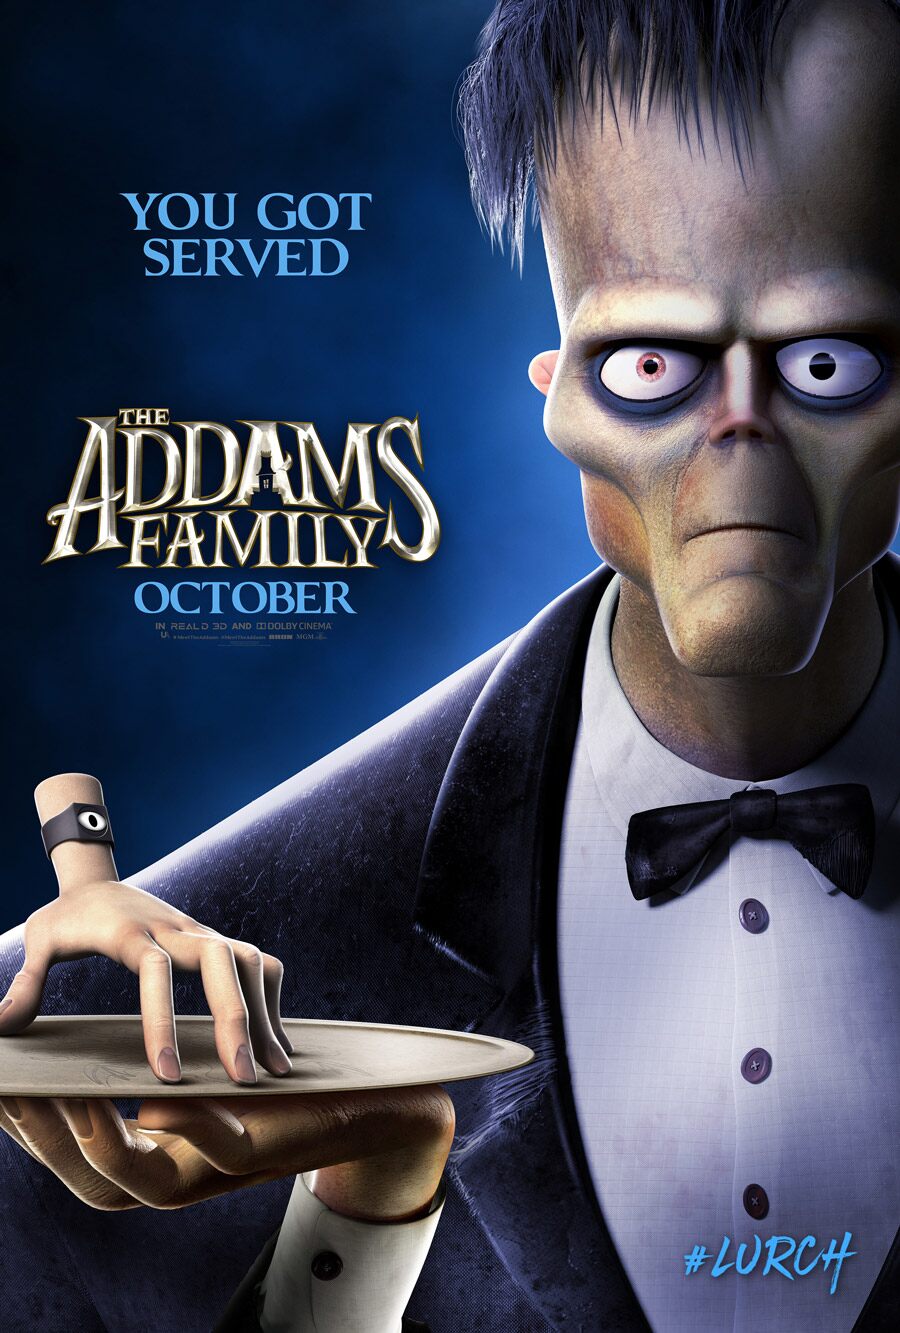 The Addams Family character posters introduce the creepy, kooky clan